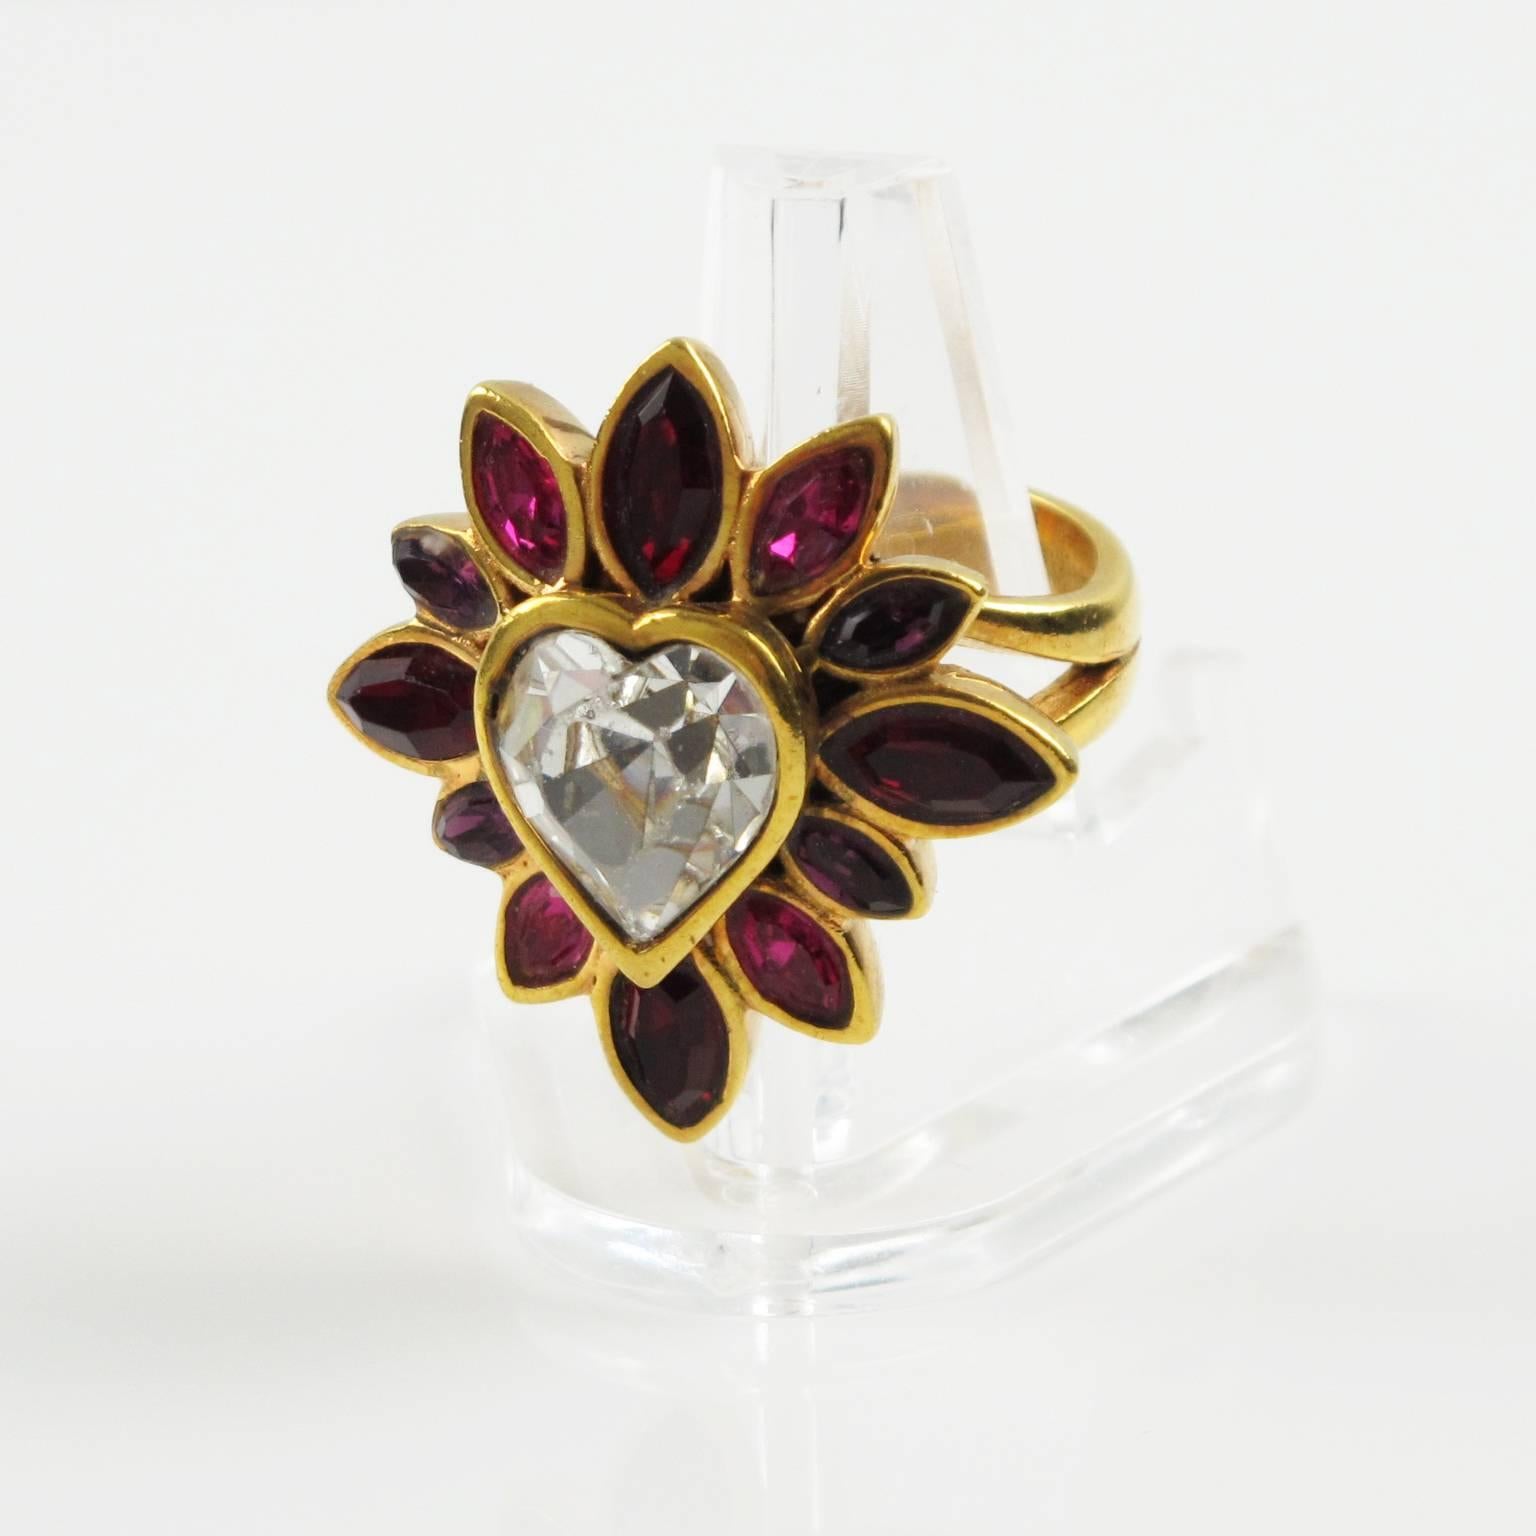 Vintage 1980s gorgeous jeweled cocktail ring by YVES SAINT LAURENT, YSL Paris. Floral shape with large band in gold plated metal ornate with rhinestone in pear shape. Assorted color of hot pink, ruby red and purple. Center of ring is a huge clear